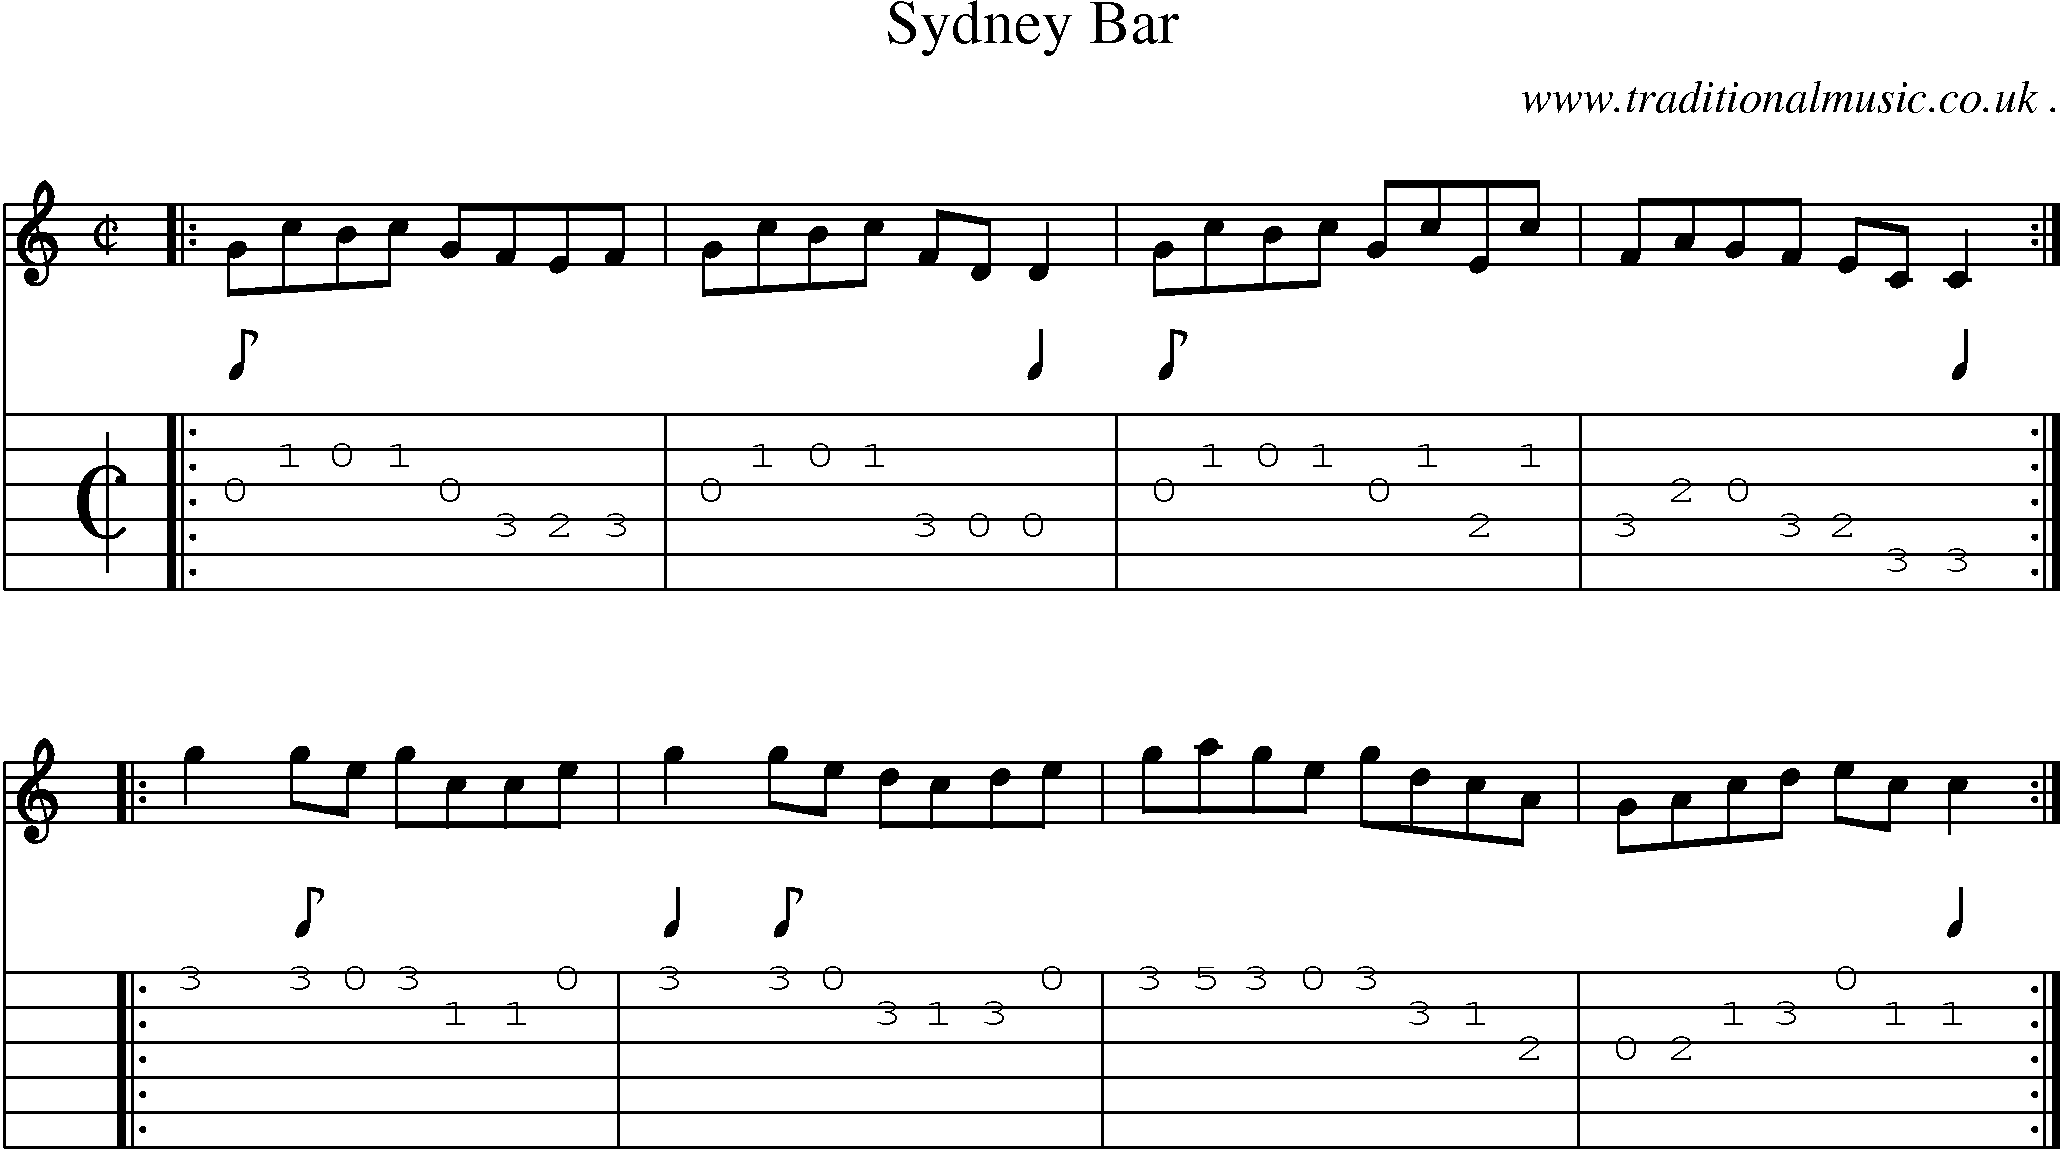 Sheet-Music and Guitar Tabs for Sydney Bar